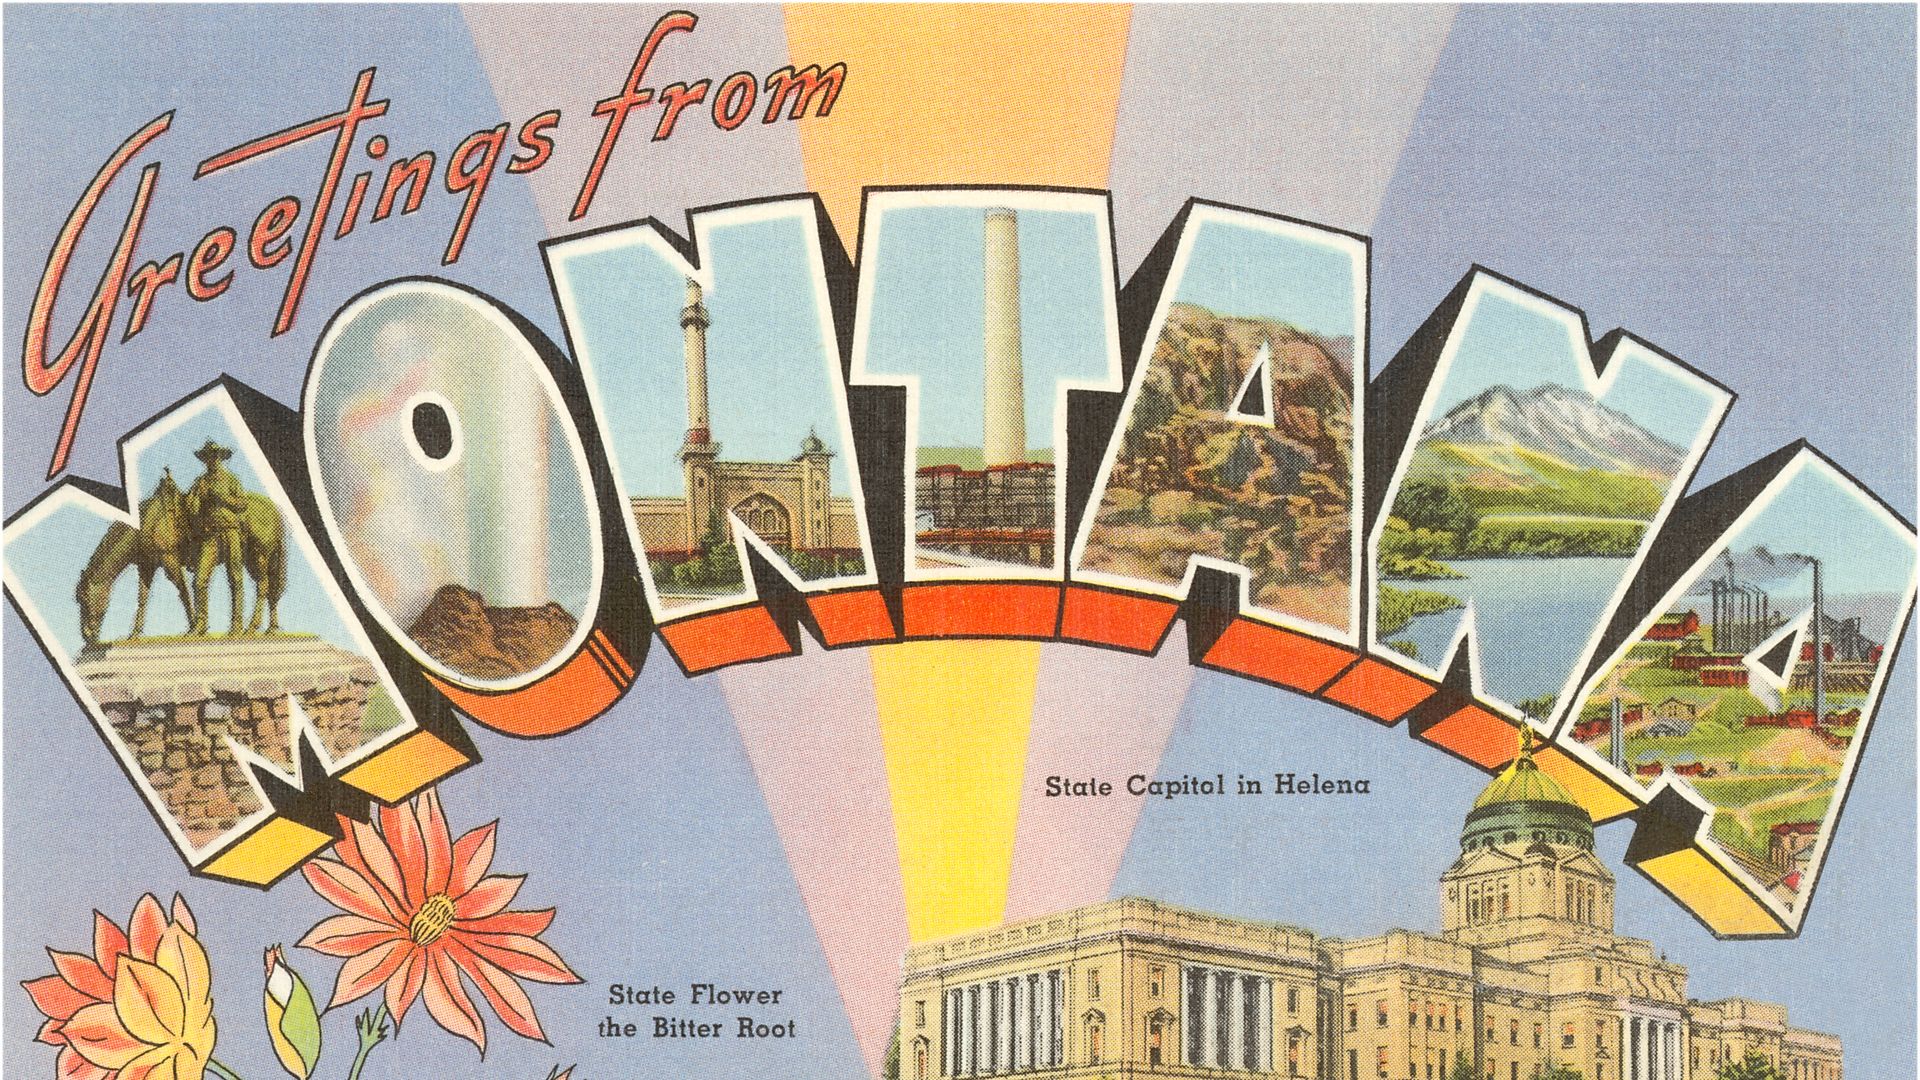 A vintage "Greetings from Montana" postcard in pastel colors